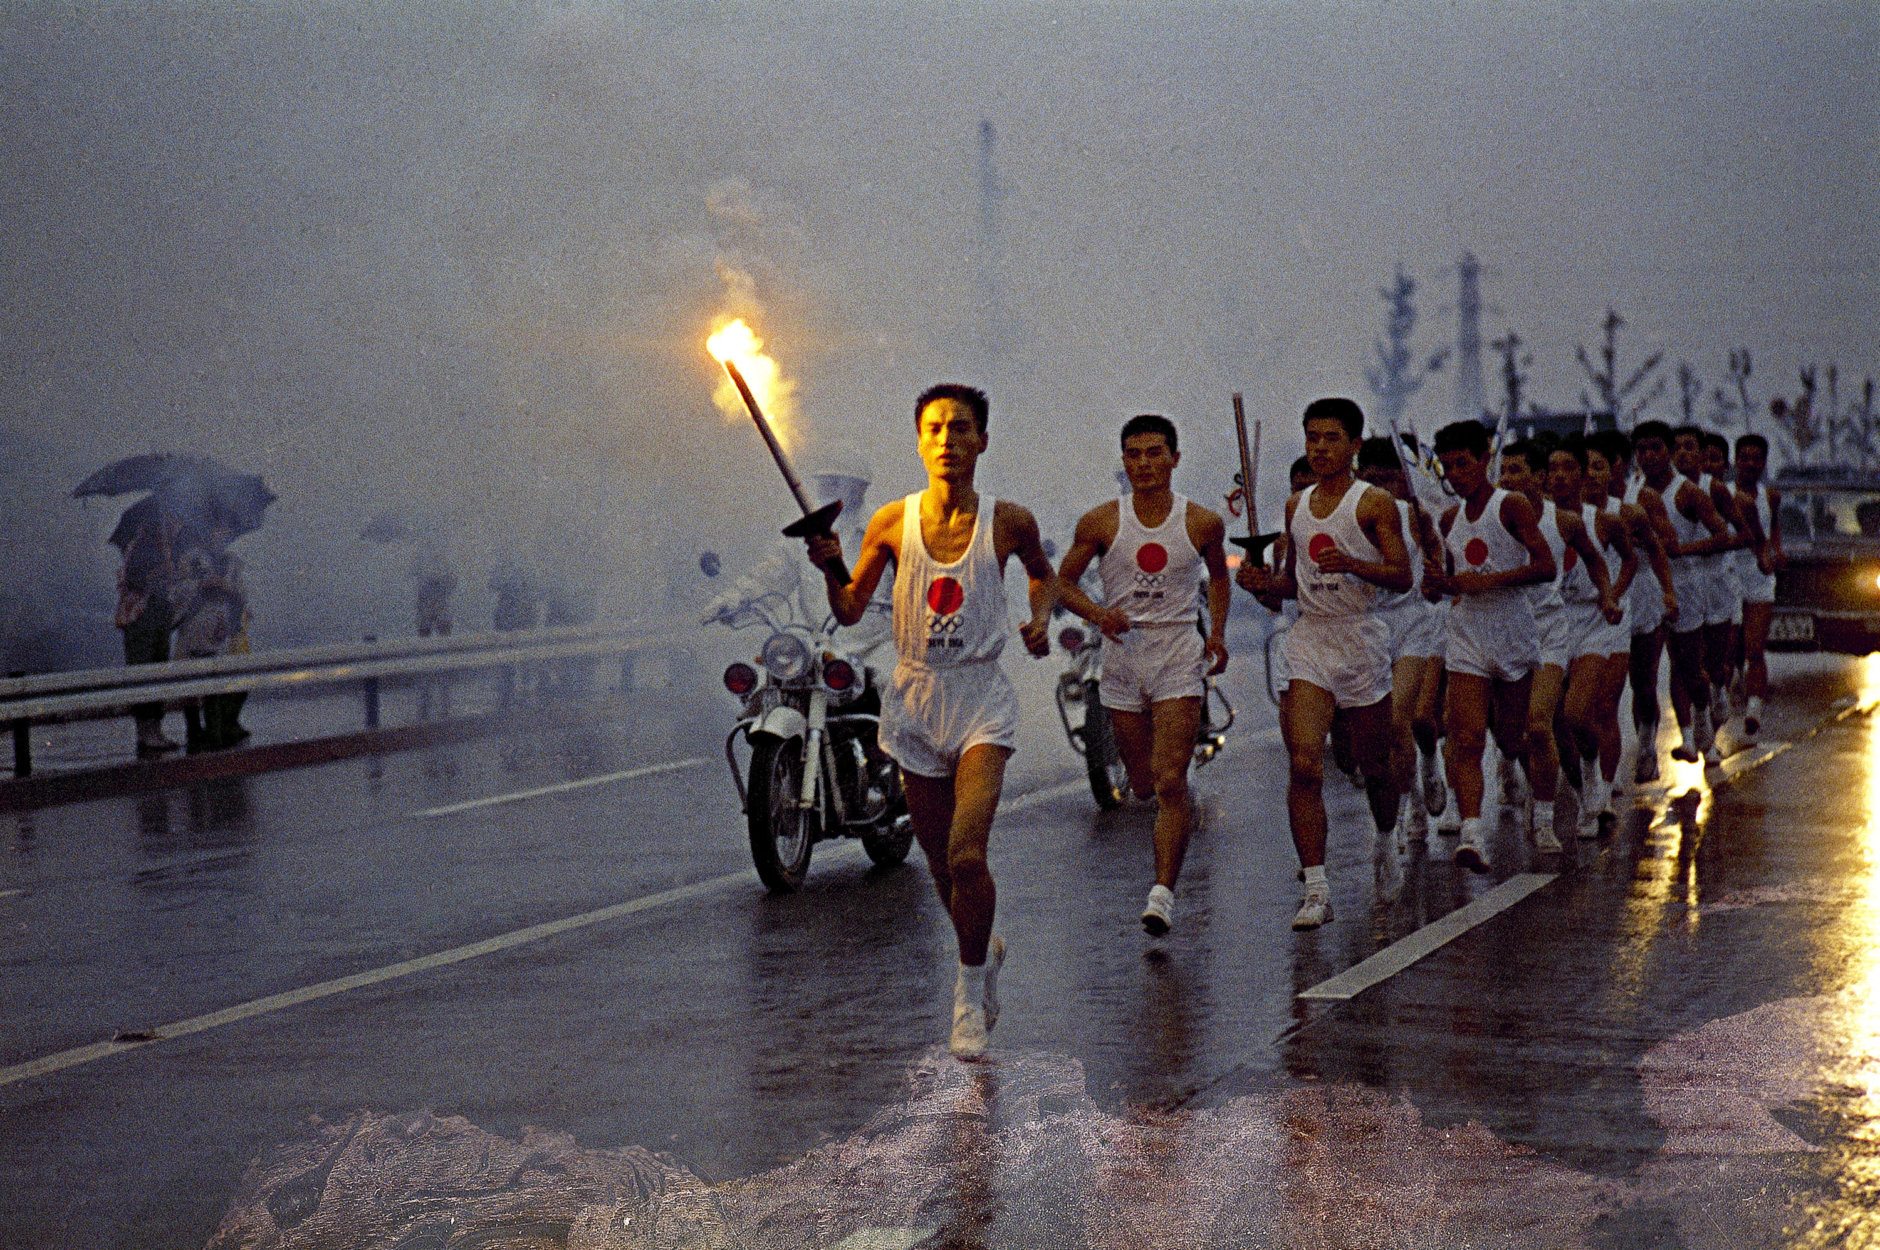 Japanese torchbearers of the Olympic flame relay team run through the rain on their way to the Olympic Stadium in October 1964 in Tokyo, Japan. The Olympic Flame is going to be lit by Yoshinori Sakai who was born in Hiroshima on August 6, 1945, the day the nuclear weapon destroyed that city. He symbolizes the rebirth of Japan after the Second World War when he opens the Summer Olympic Games on October 10, 1964 in Tokyo, Japan. (AP Photo)